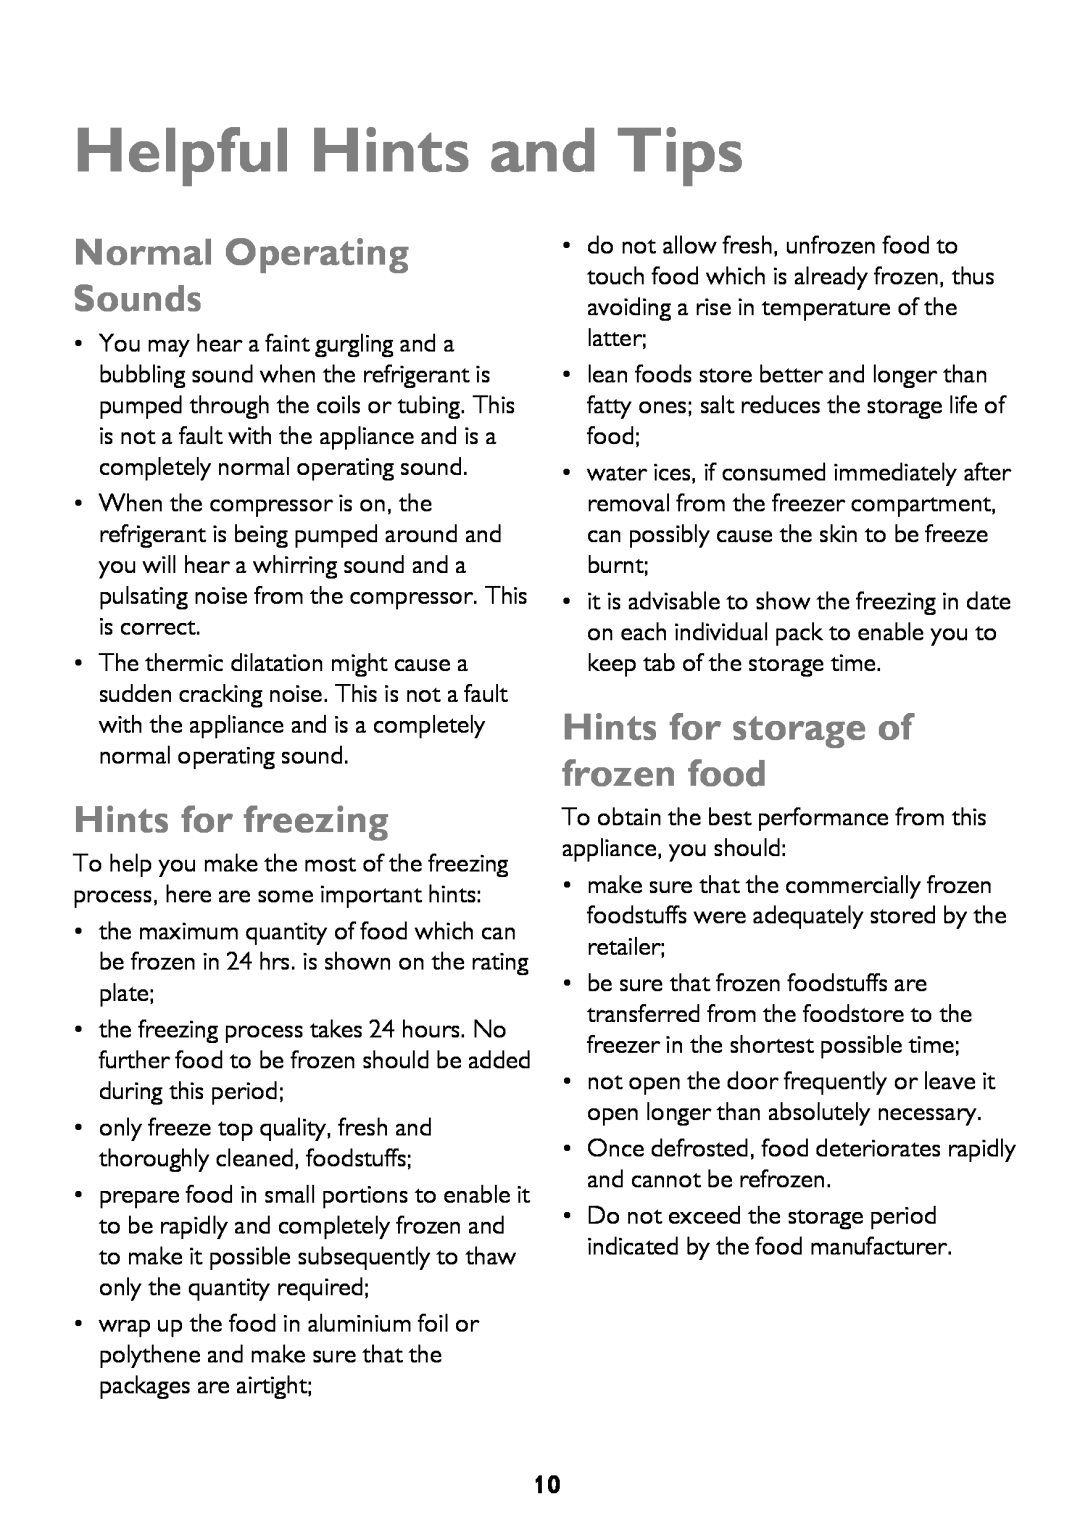 John Lewis JLFZW1601 Helpful Hints and Tips, Normal Operating Sounds, Hints for freezing, Hints for storage of frozen food 